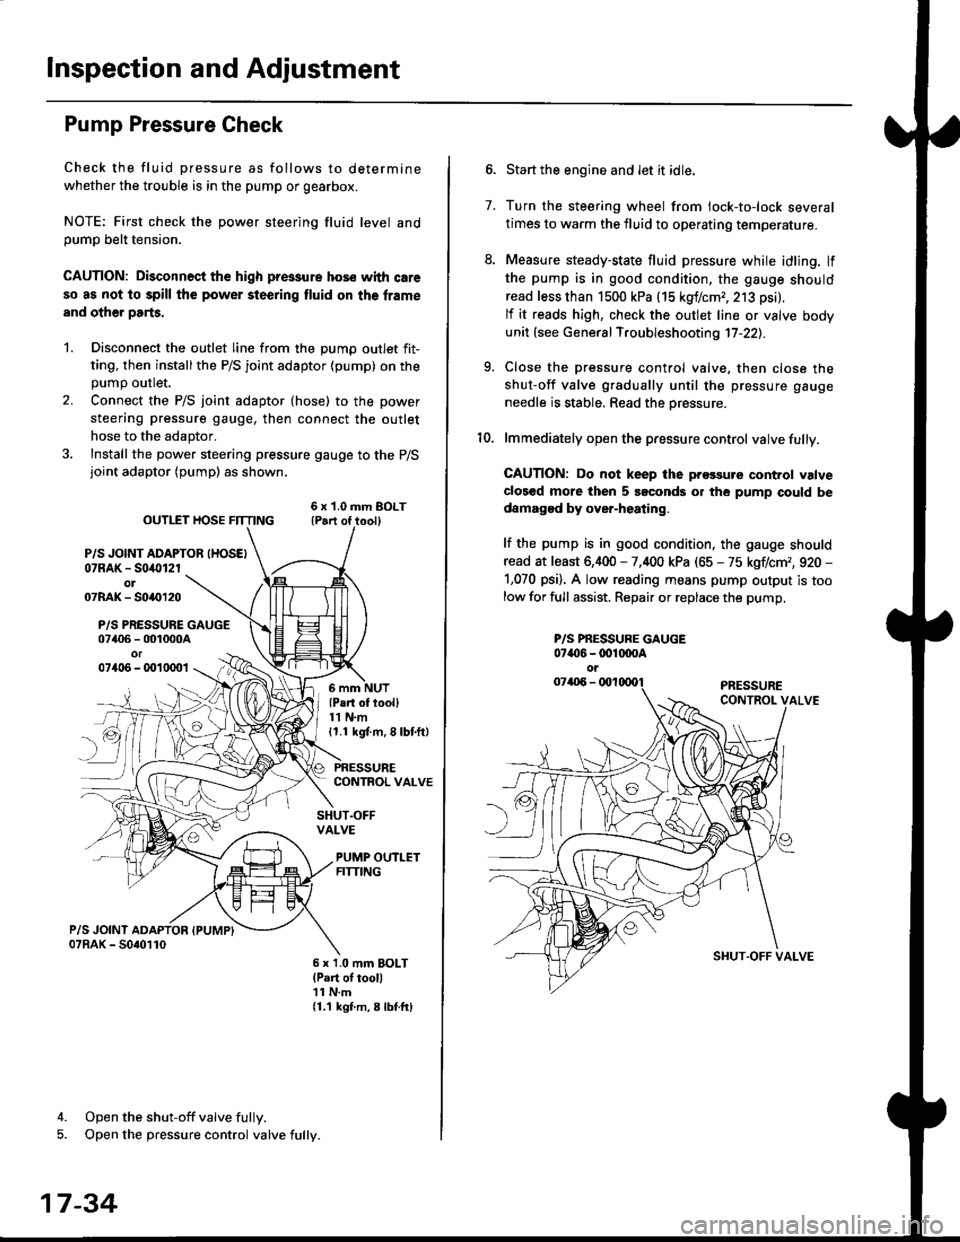 HONDA CIVIC 1997 6.G Owners Manual lnspection and Adjustment
Pump Pressure Check
Check the fluid pressure as follows to determine
whether the trouble is in the pump or gearbox.
NOTE: First check the power steering fluid level andpump b